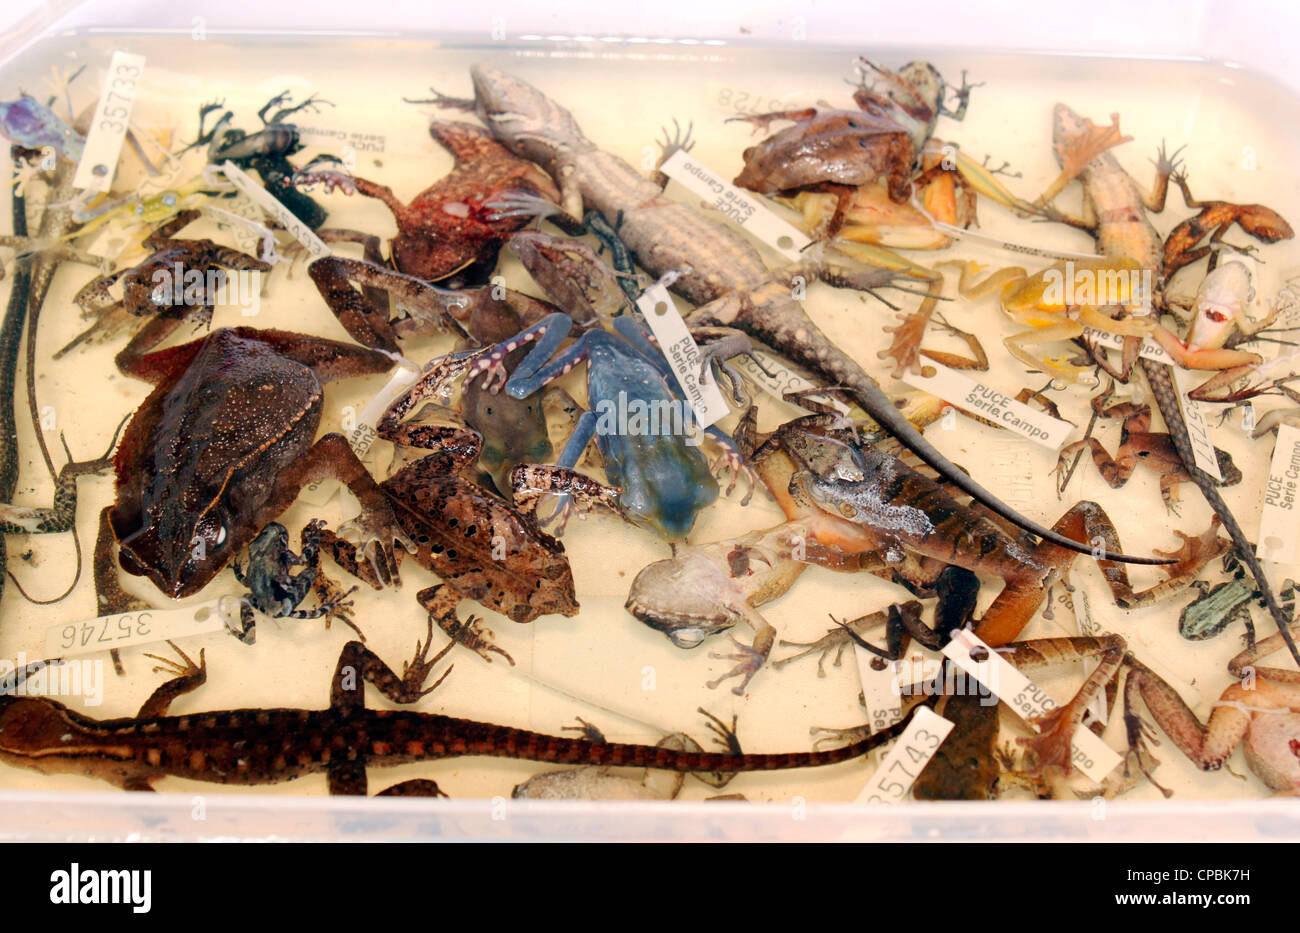 Preserved specimens of reptiles and amphibians for biological research, collected in Ecuador Stock Photo